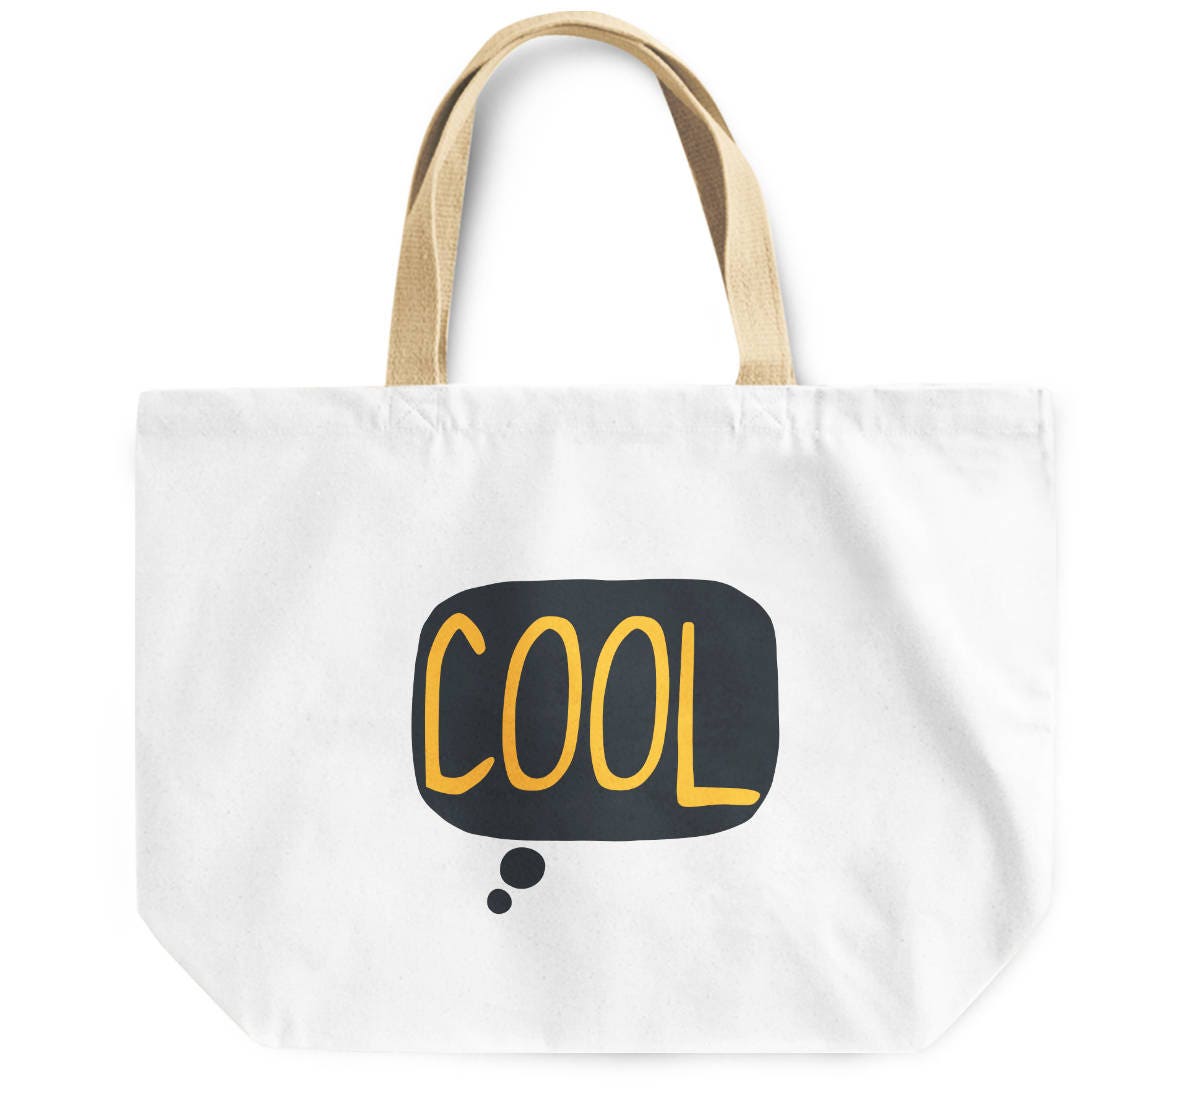 A cool tote bag that actually says Cool on it dialog box | Etsy